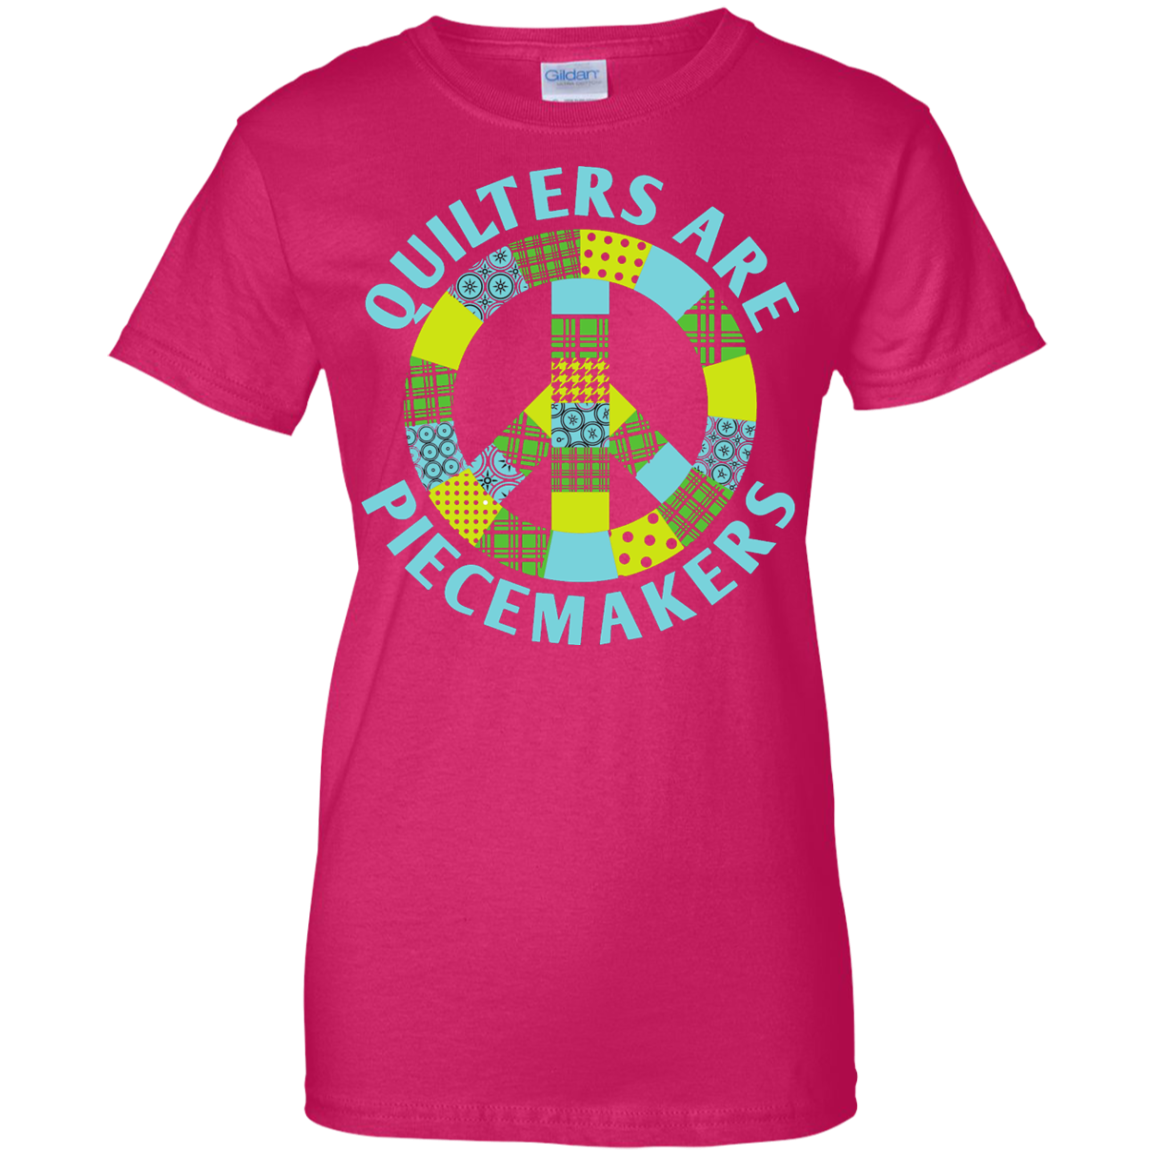 Quilters are Piecemakers Ladies Custom 100% Cotton T-Shirt - Crafter4Life - 6